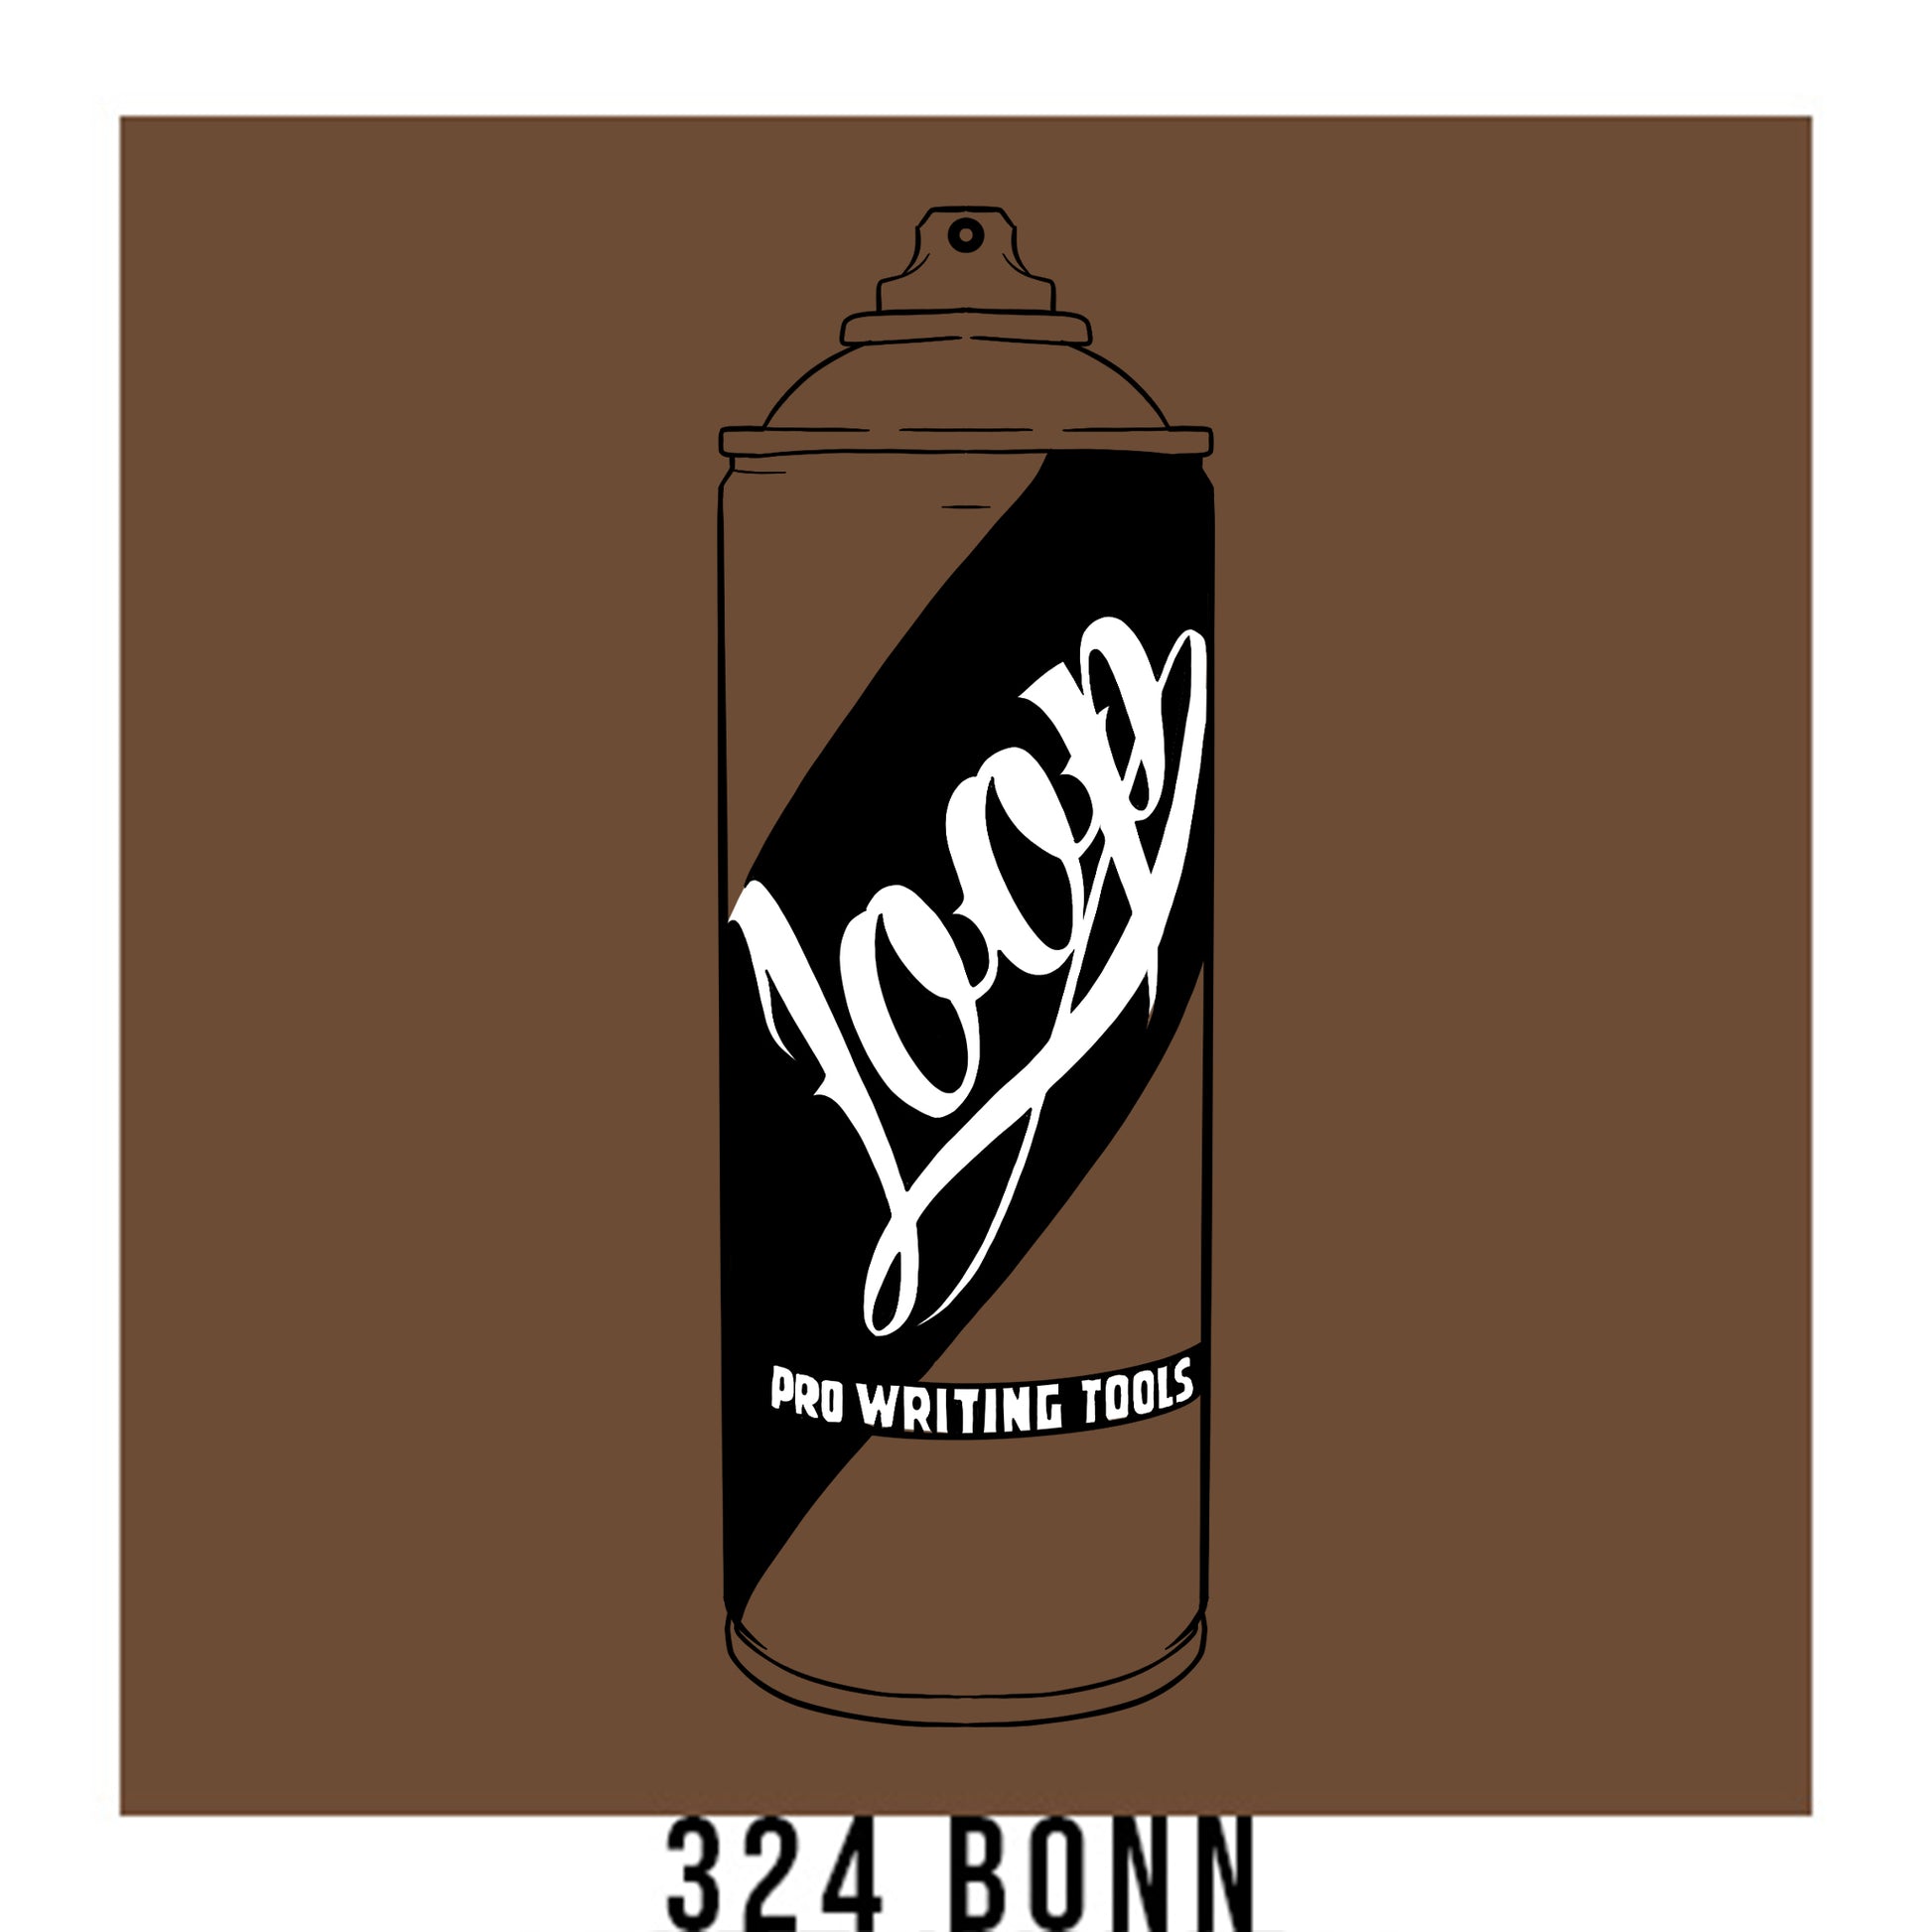 A black outline drawing of a brown spray paint can with the word "Loop" written on the face in script. The background is a color swatch of the same brown with a white border with the words "324 Bonn" at the bottom.